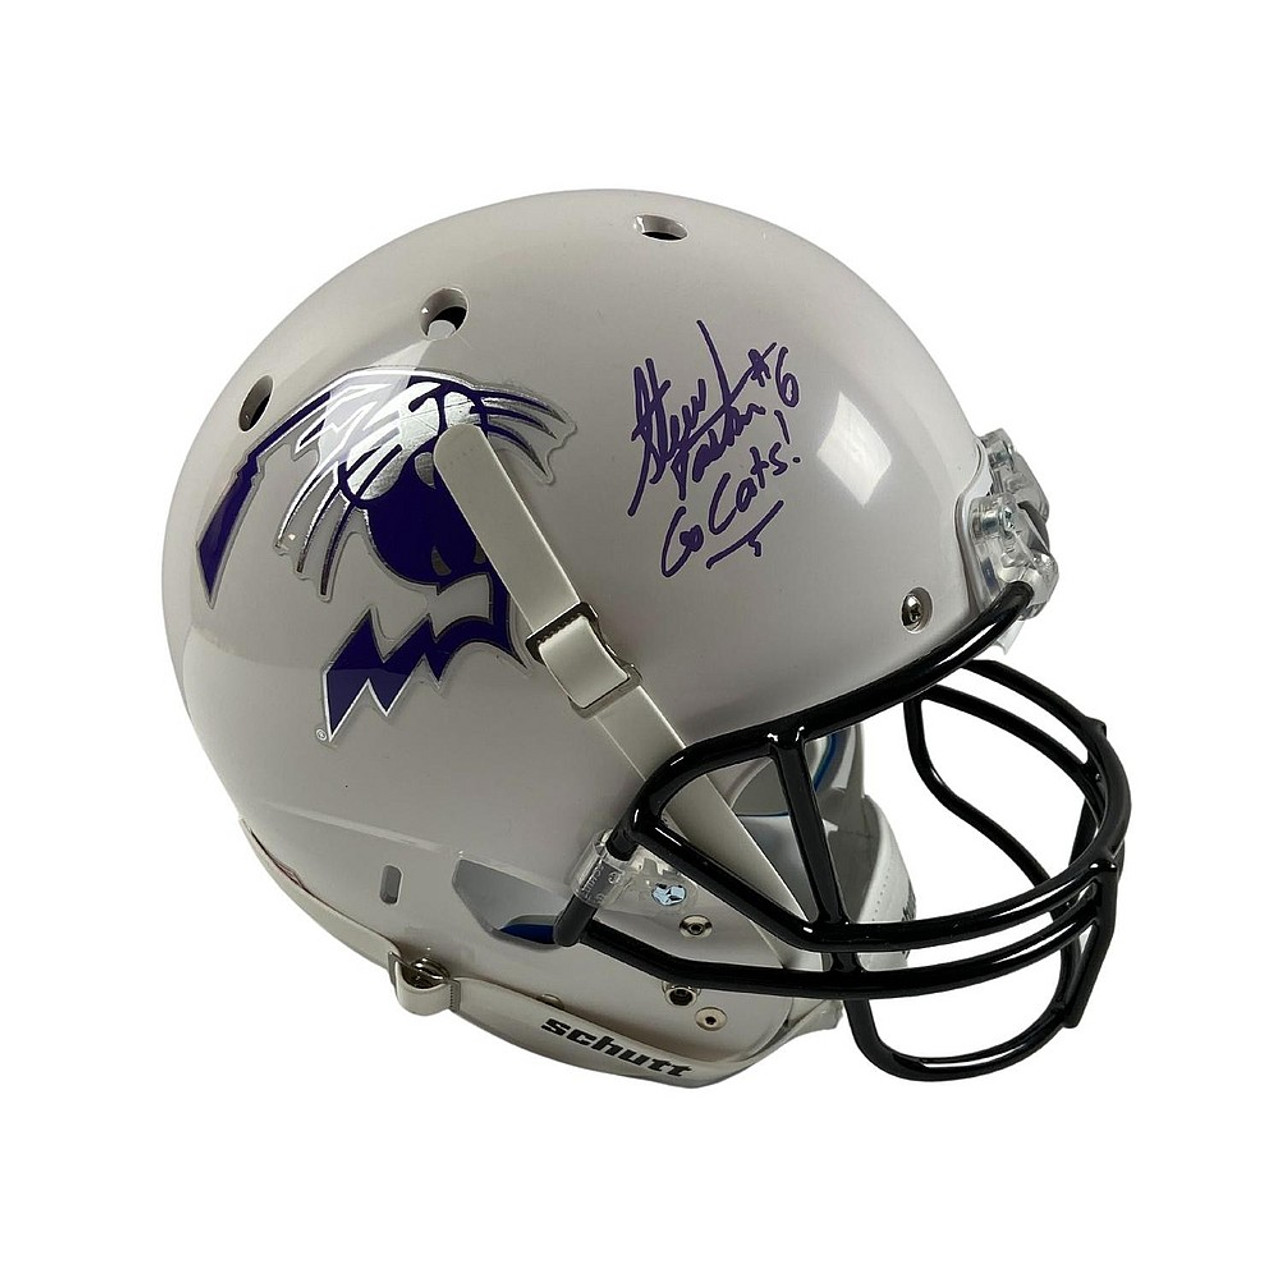 Steve Tasker Autographed Signed Northwestern Wildcats Schutt White Replica Full Helmet with Cats Inscription - PSA/DNA Authentic